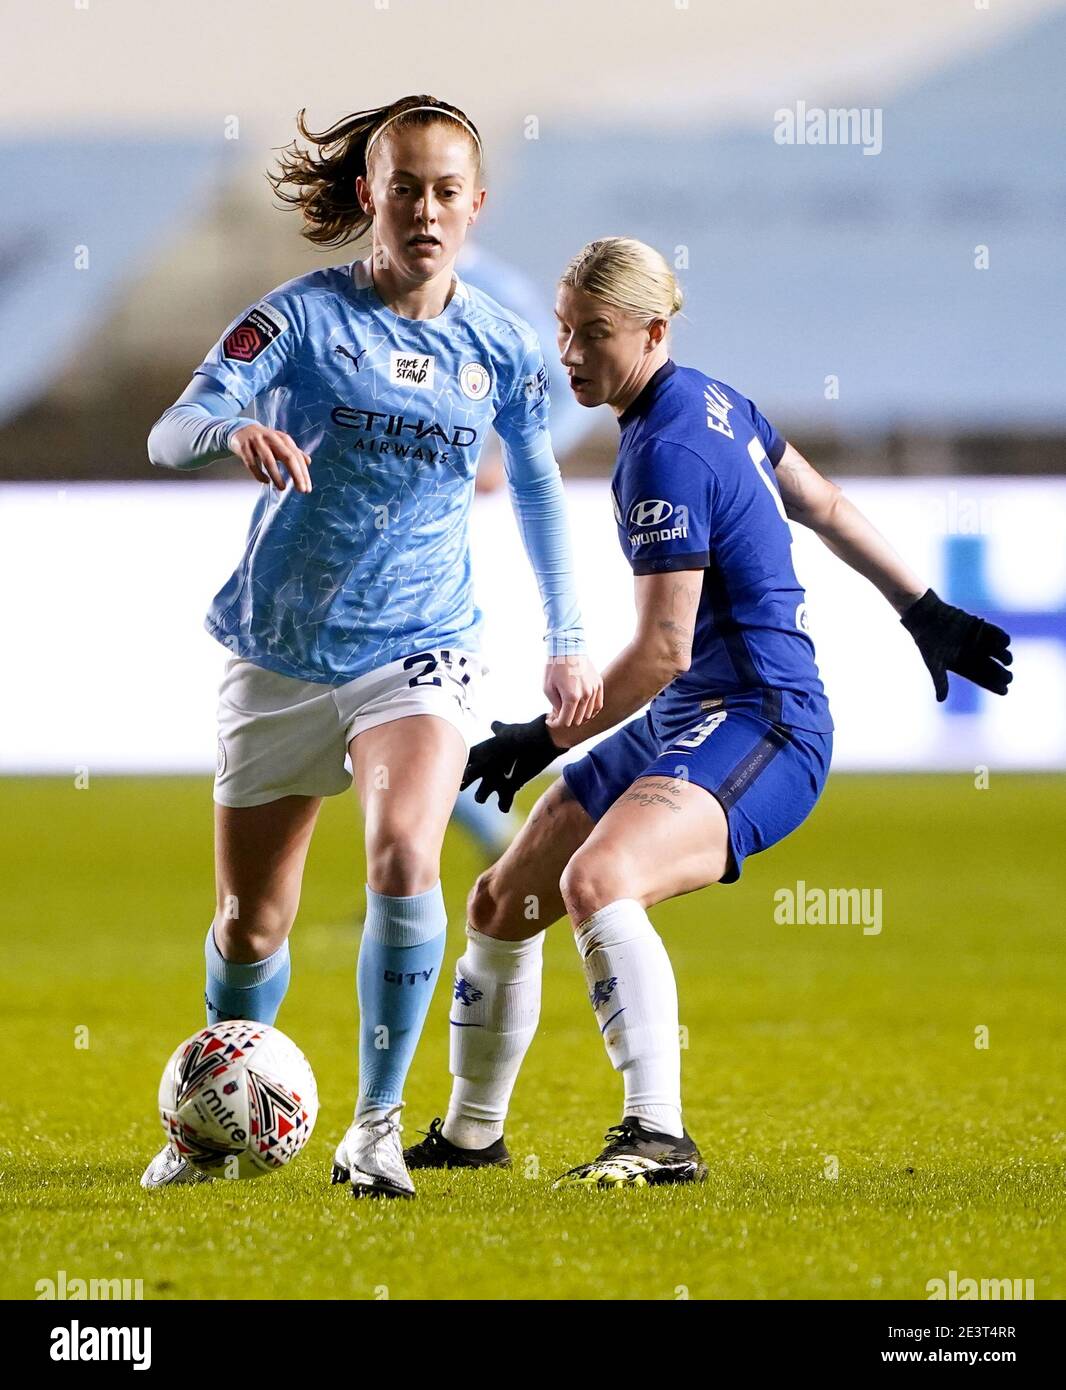 Manchester City's Keira Walsh (left) and Chelsea's Bethany England battle for the ball during the FA Continental Tyres League Cup quarter-final match at Academy Stadium, Manchester. Picture date: Wednesday January 20, 2021. Stock Photo